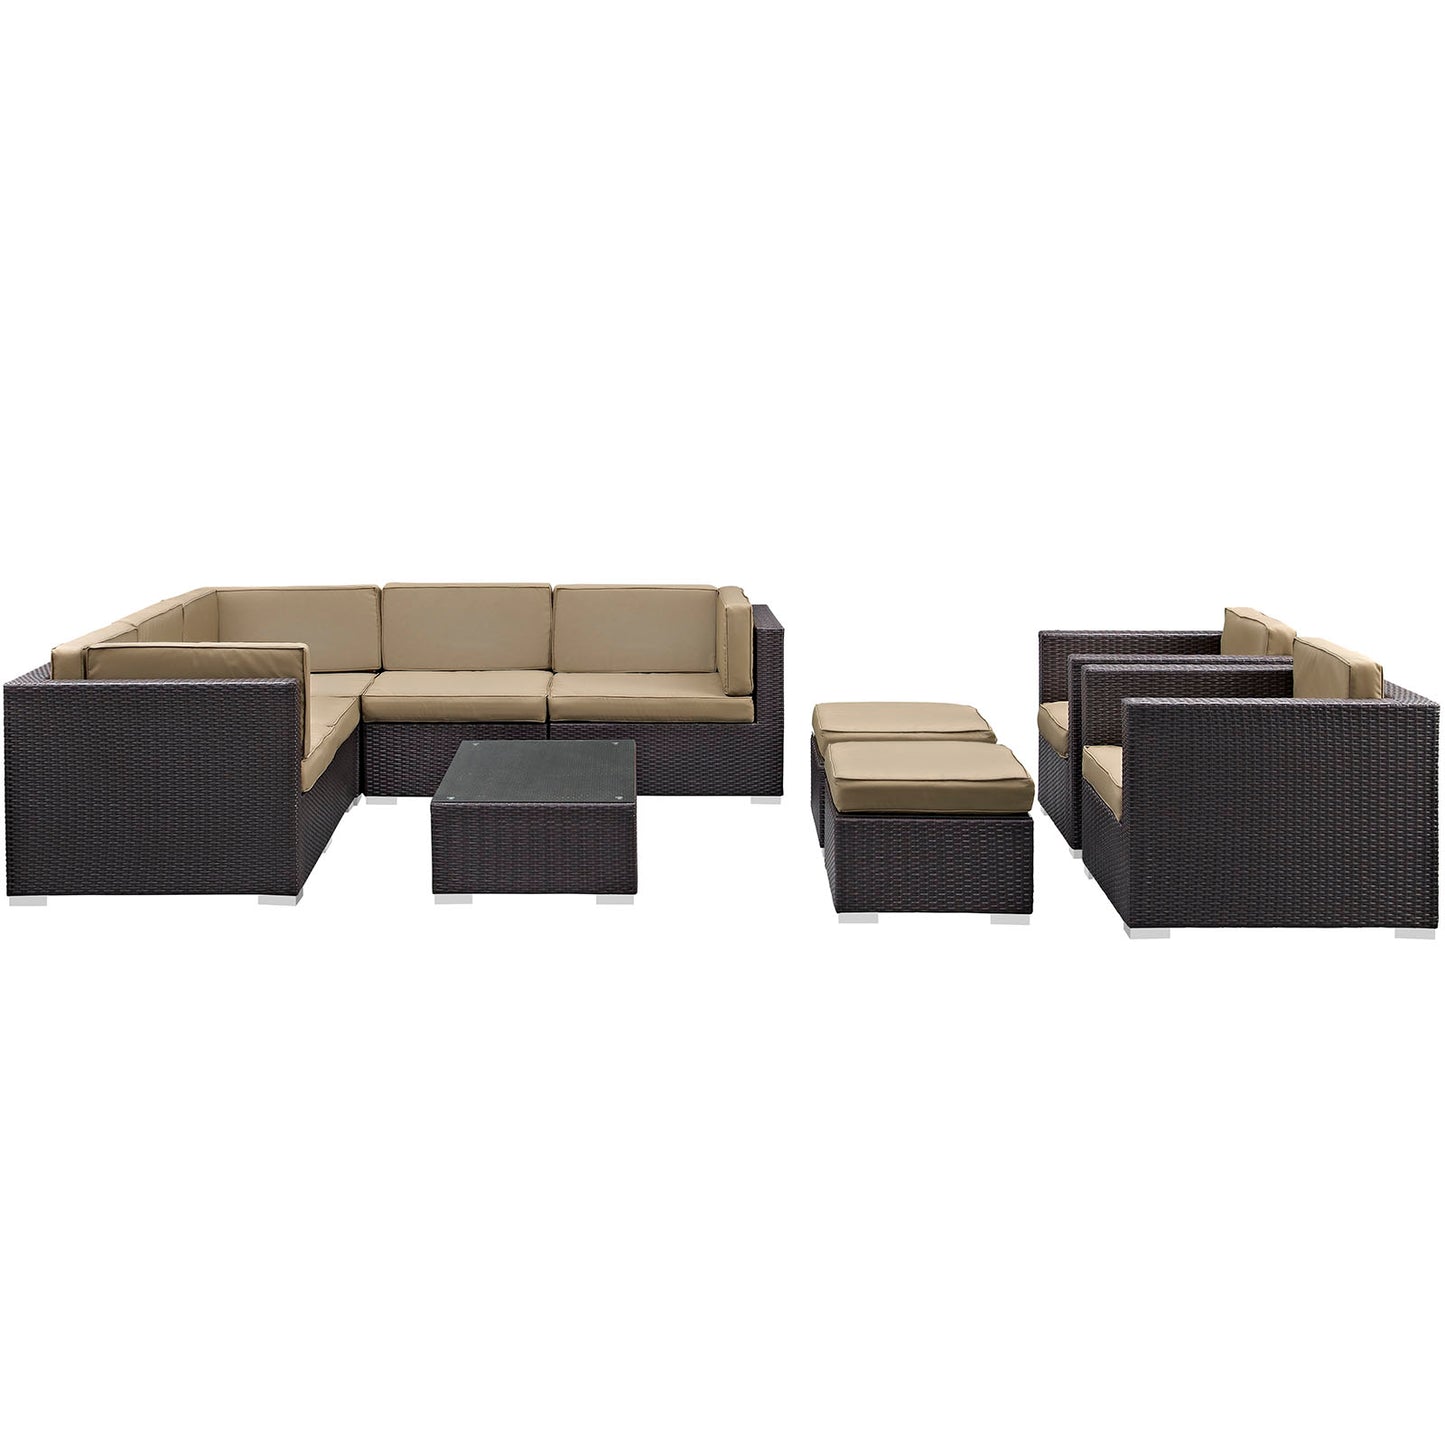 Avia 10 Piece Outdoor Patio Sectional Set By Modway - EEI-826